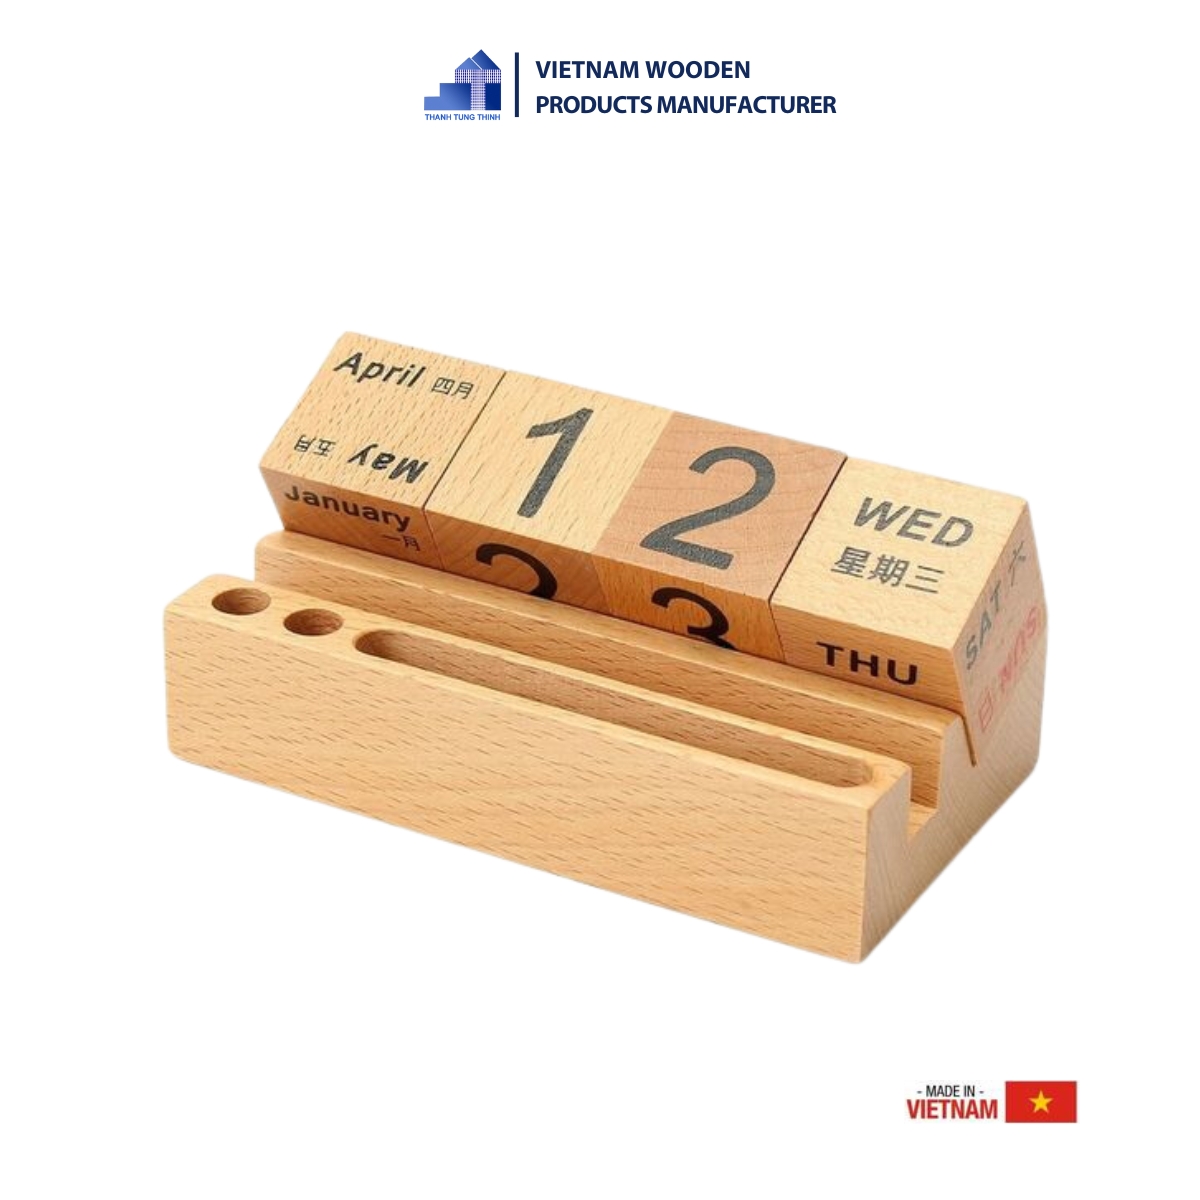 Style meets functionality with this wooden desk calendar